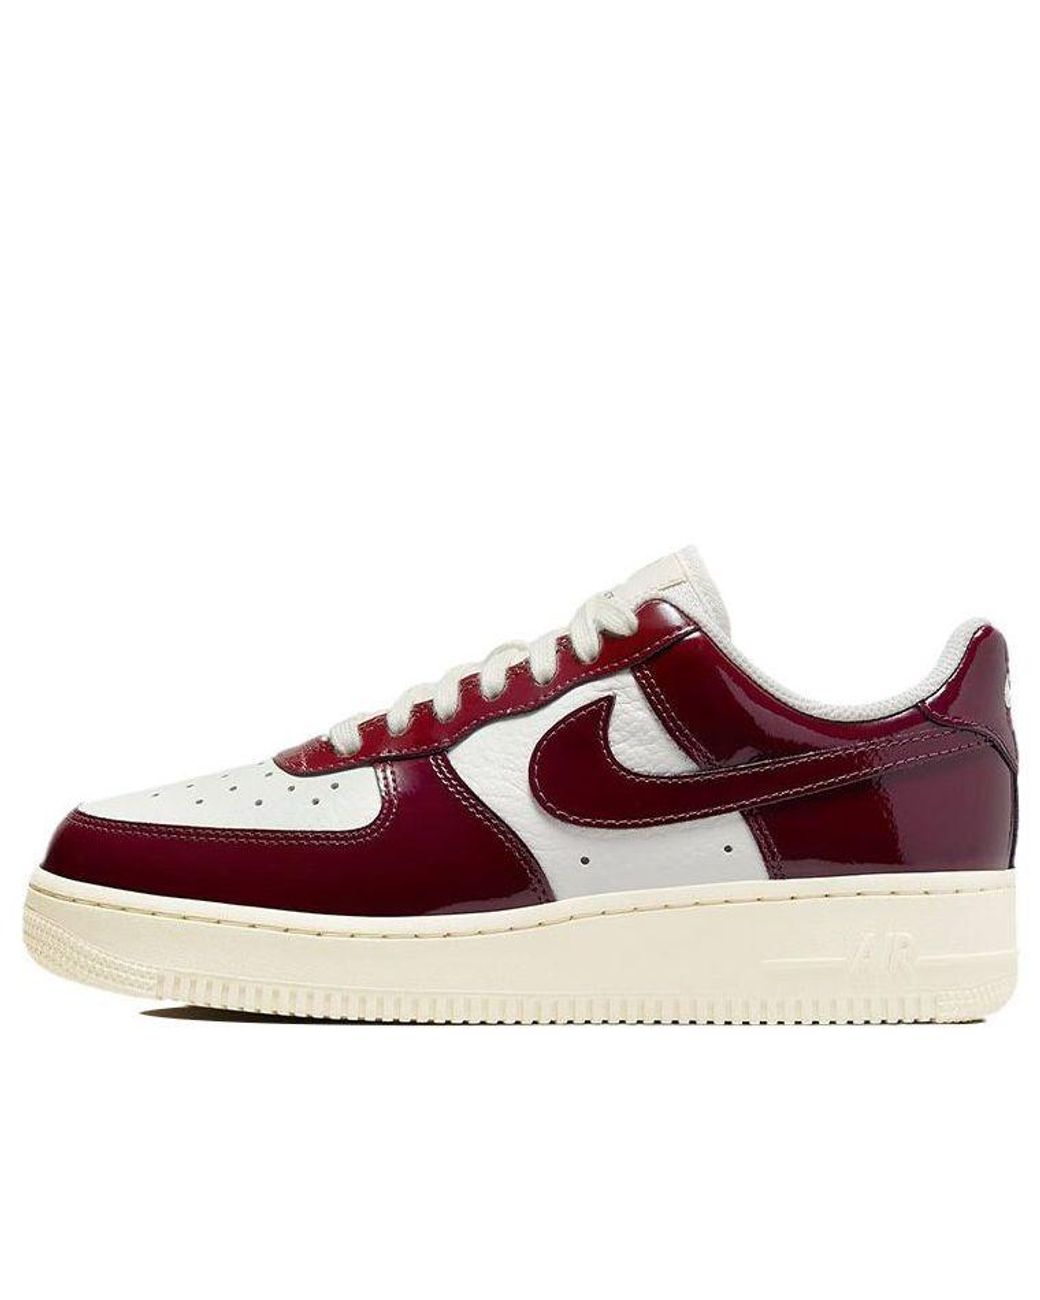 Nike Air Force 1 0 Lx Dark Beetroot Skate Shoes White/wine-red | Lyst